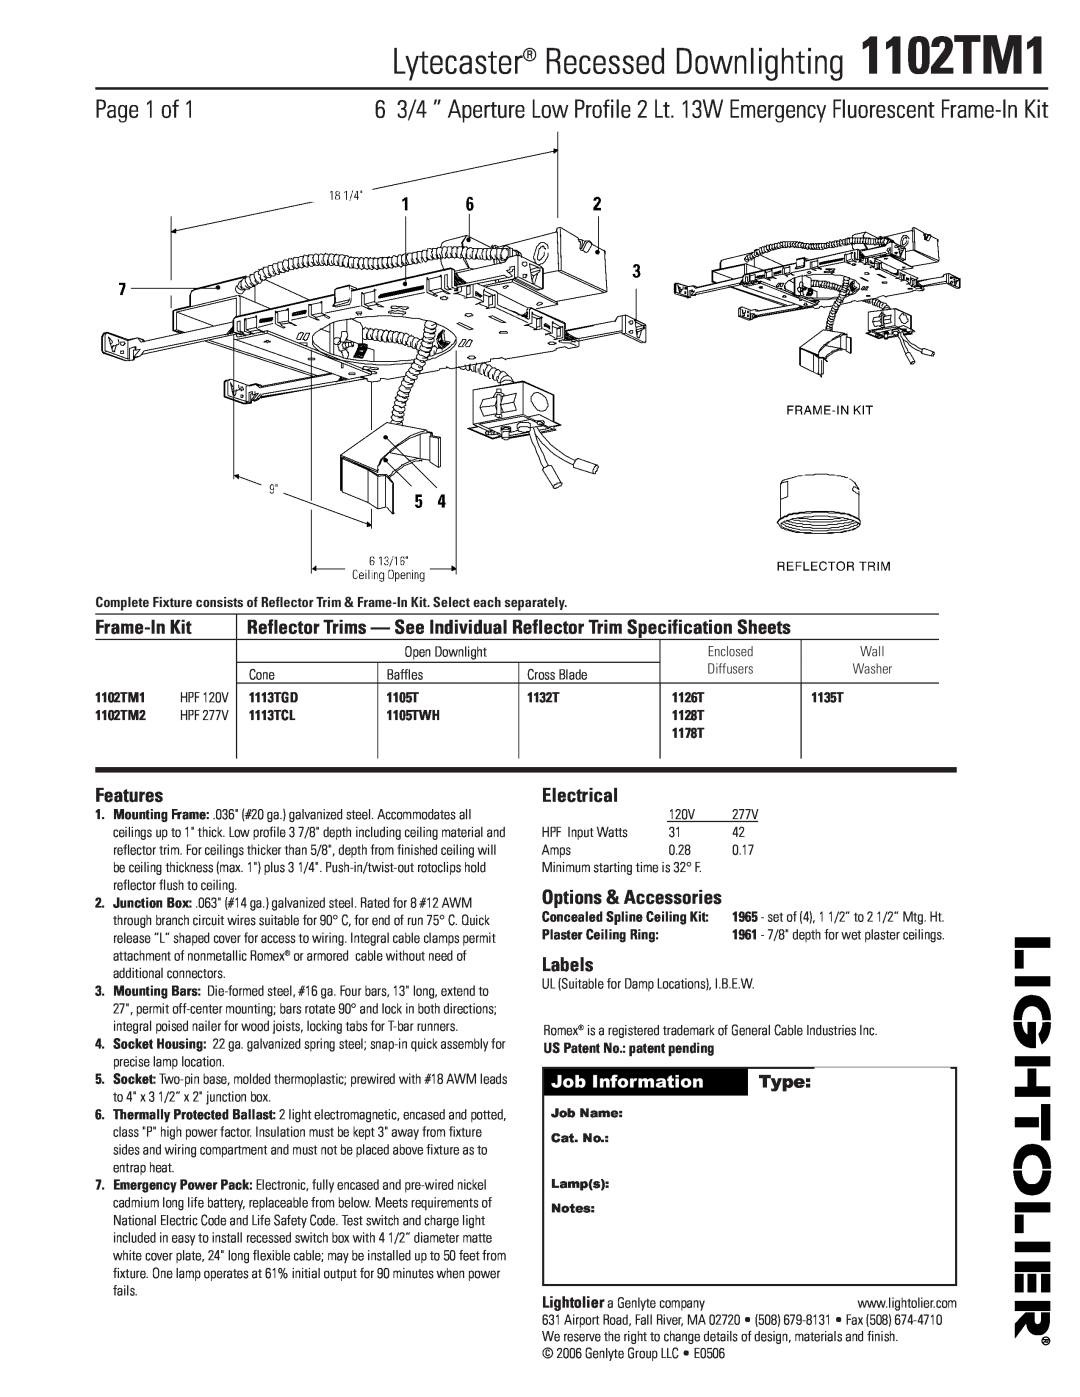 Lightolier specifications Lytecaster Recessed Downlighting 1102TM1, Page 1 of, Frame-InKit, Features, Electrical, Type 